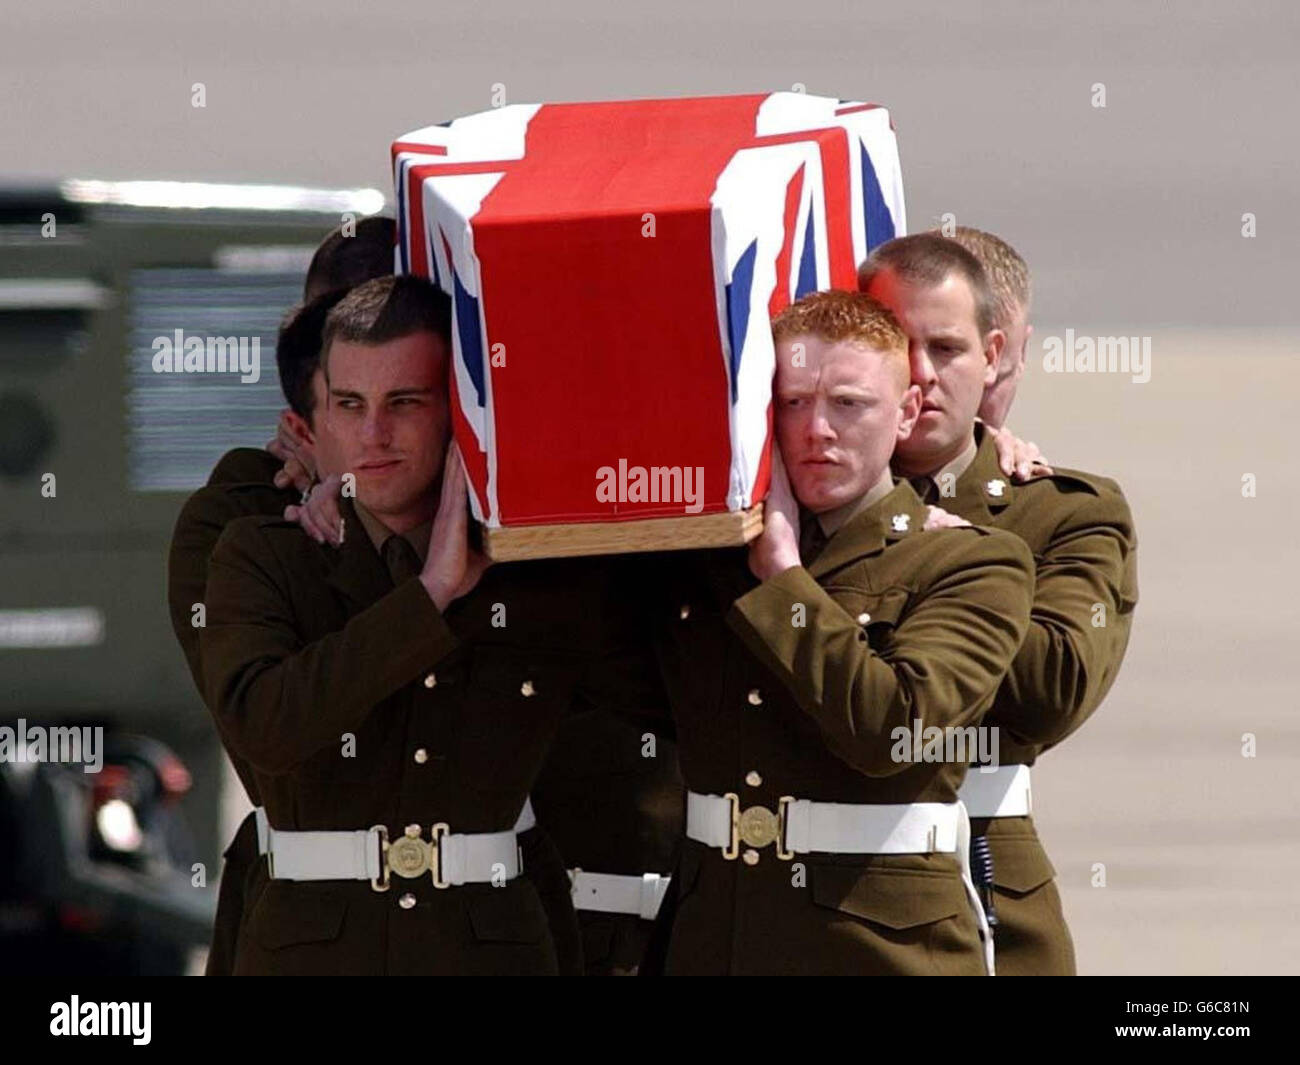 The body of Lance Corporal James McCue, 27, from Paisley, of 7 Air Assault Battalion, Royal Electrical & Mechanical Engineers, is carried from an RAF Hercules at RAF Brize Norton, during a repatriation service. * Corporal James McCue died on 30 April 2003 following an explosion in southern Iraq. Stock Photo